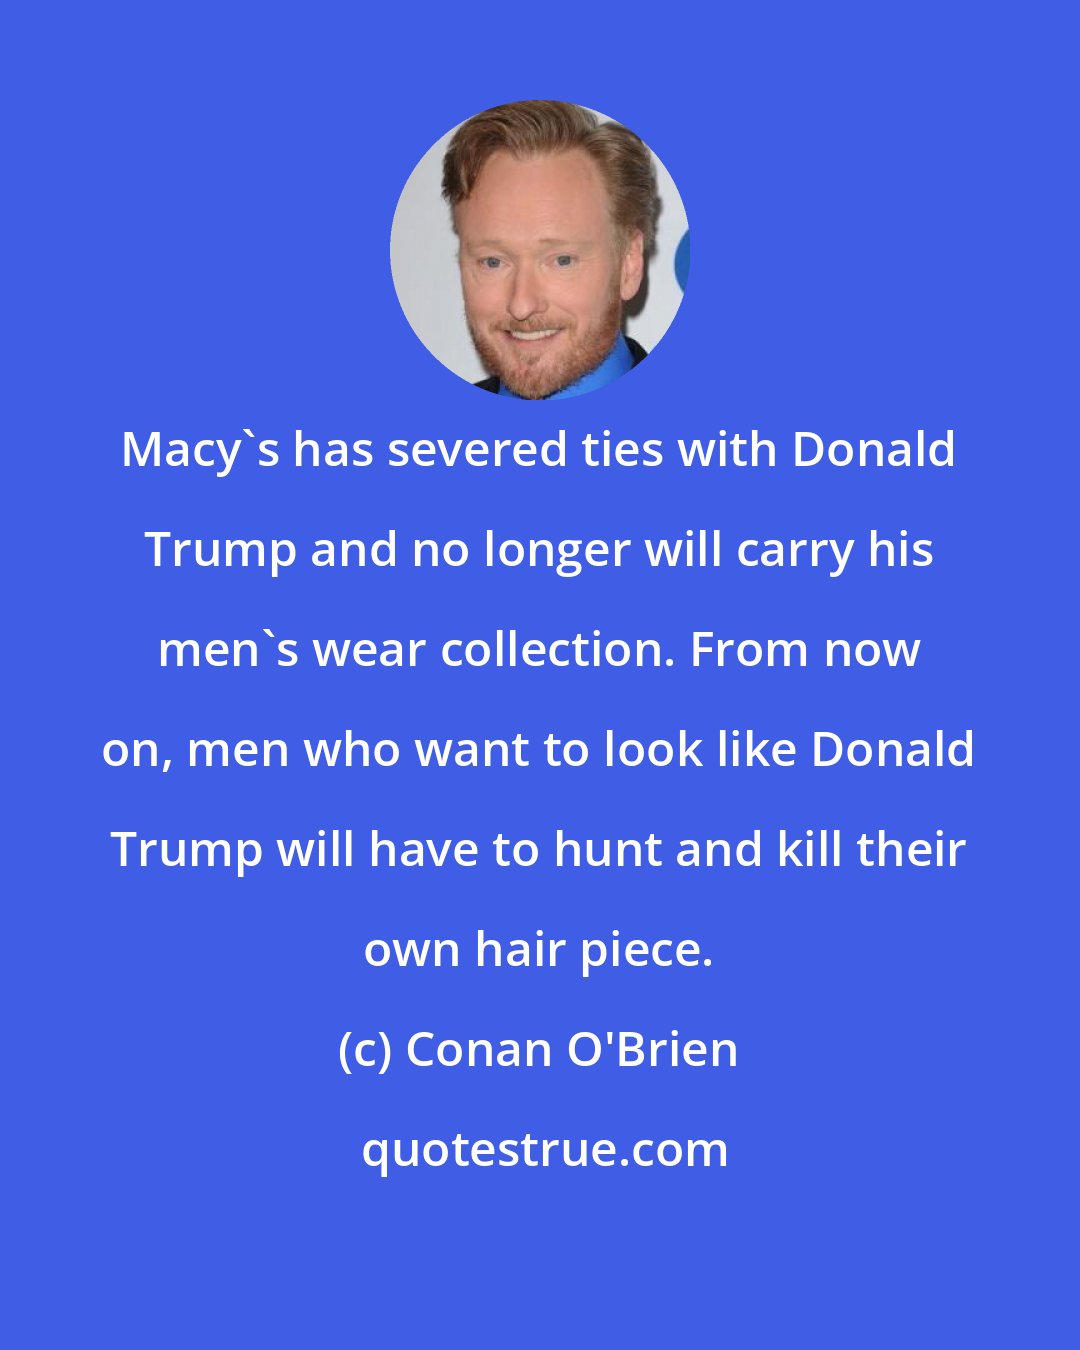 Conan O'Brien: Macy's has severed ties with Donald Trump and no longer will carry his men's wear collection. From now on, men who want to look like Donald Trump will have to hunt and kill their own hair piece.